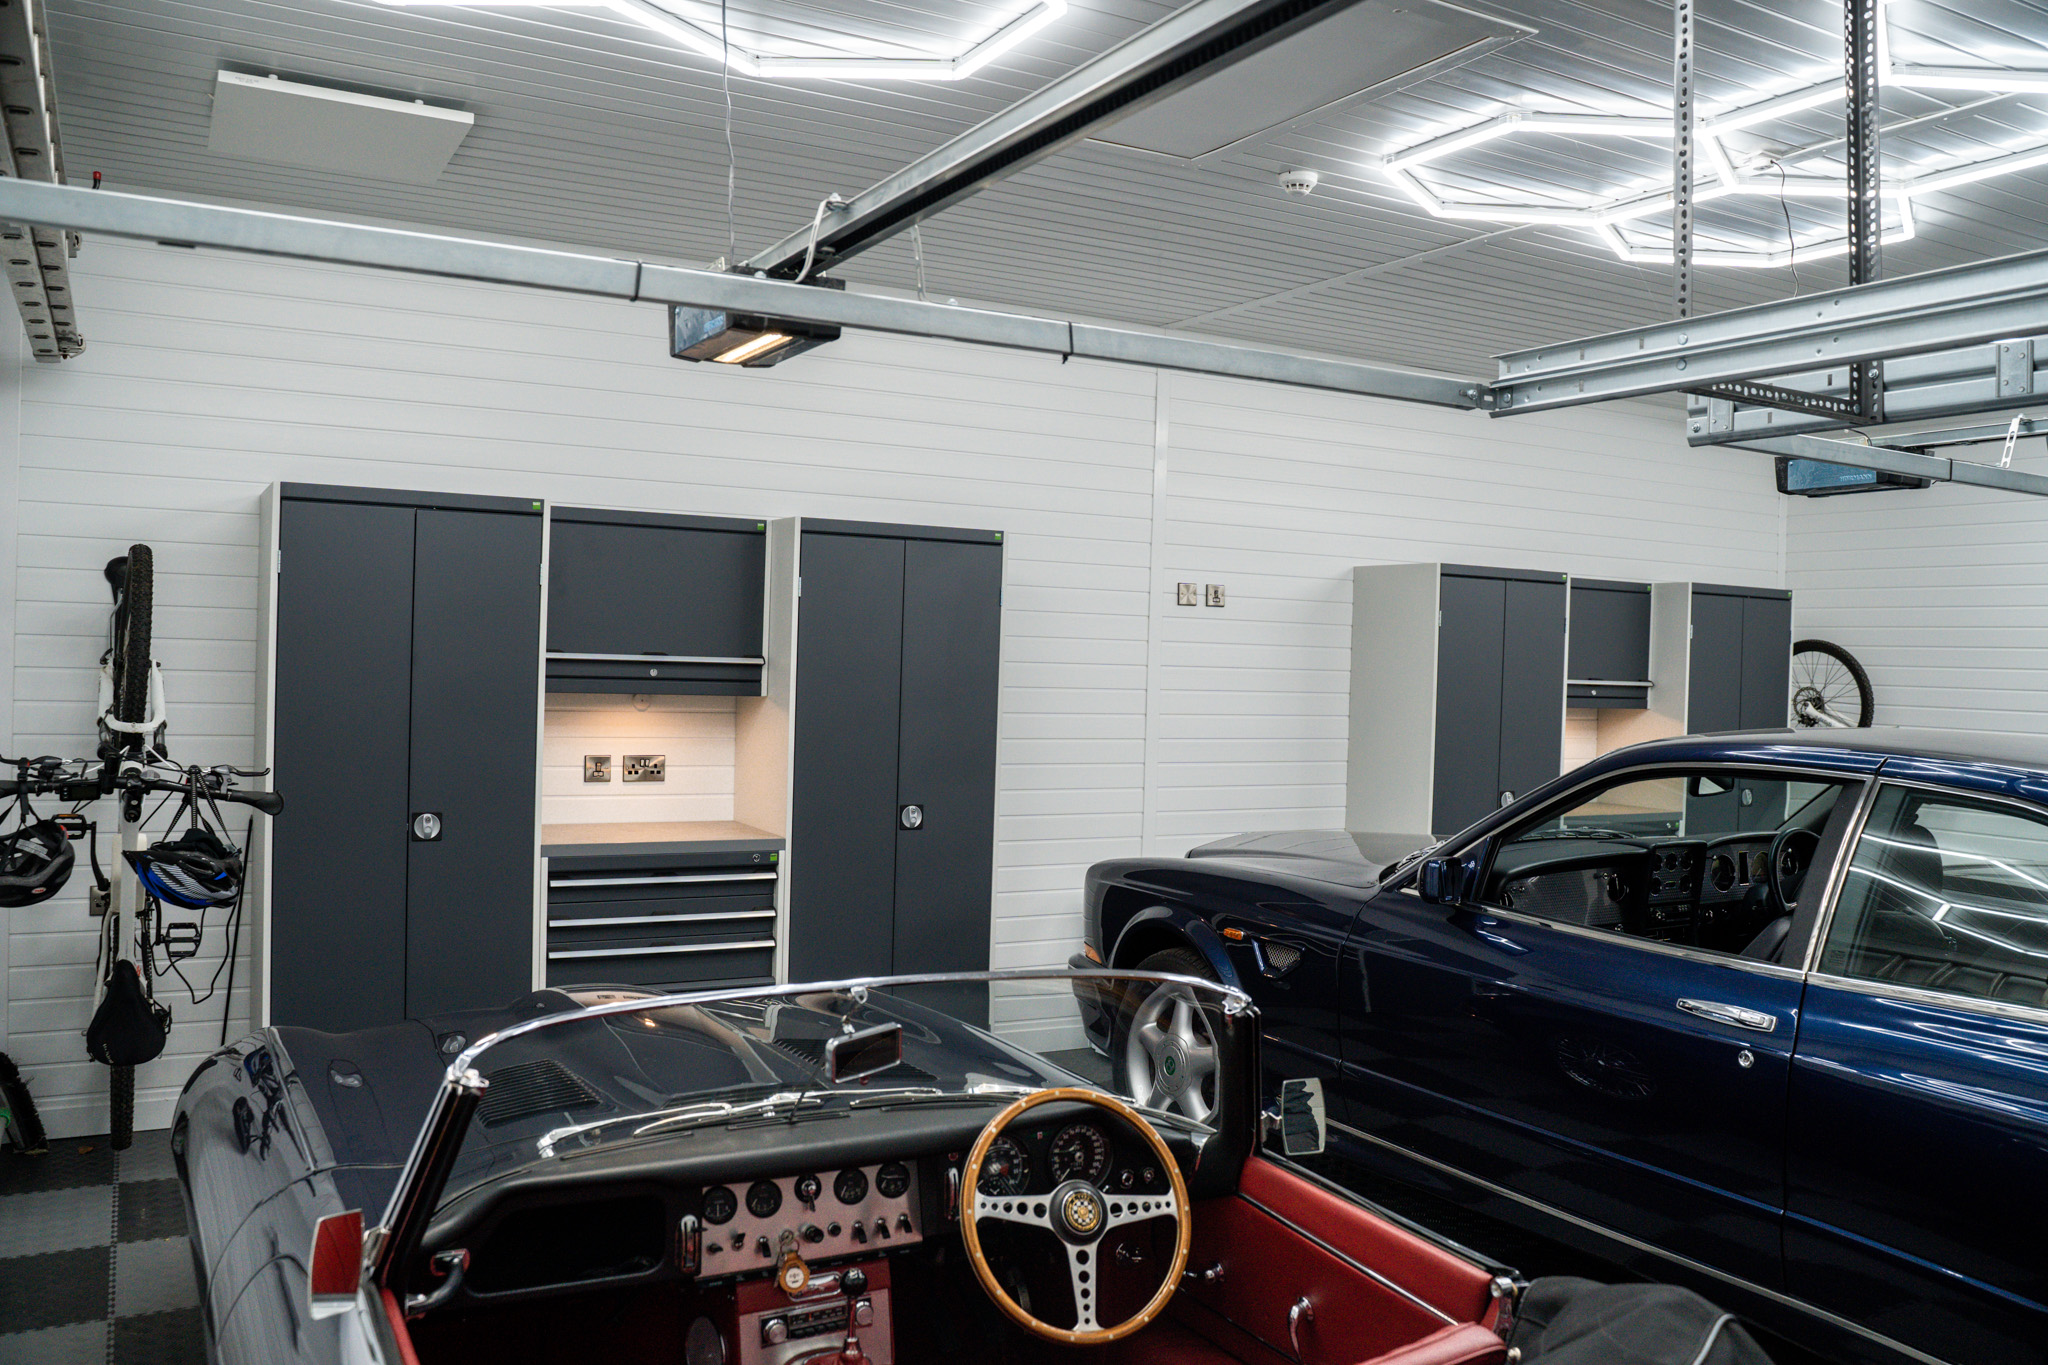 5 Compelling Reasons Why Your Car Belongs in the Garage